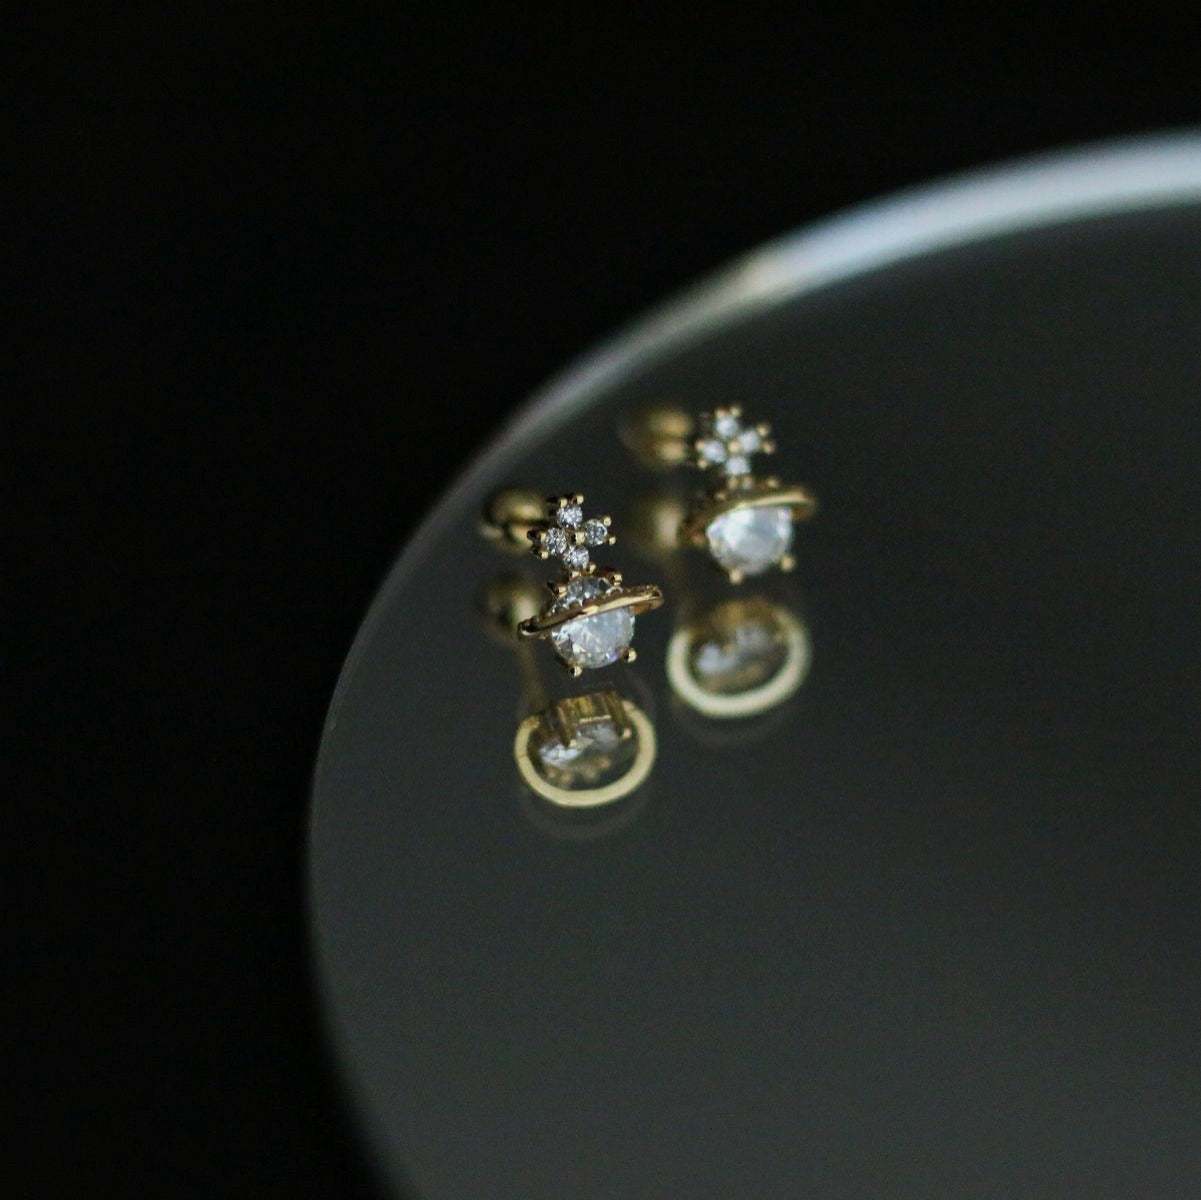 Monora Astro-Glamour *Saturn* Earrings - Shine Bright with Cosmic Elegance